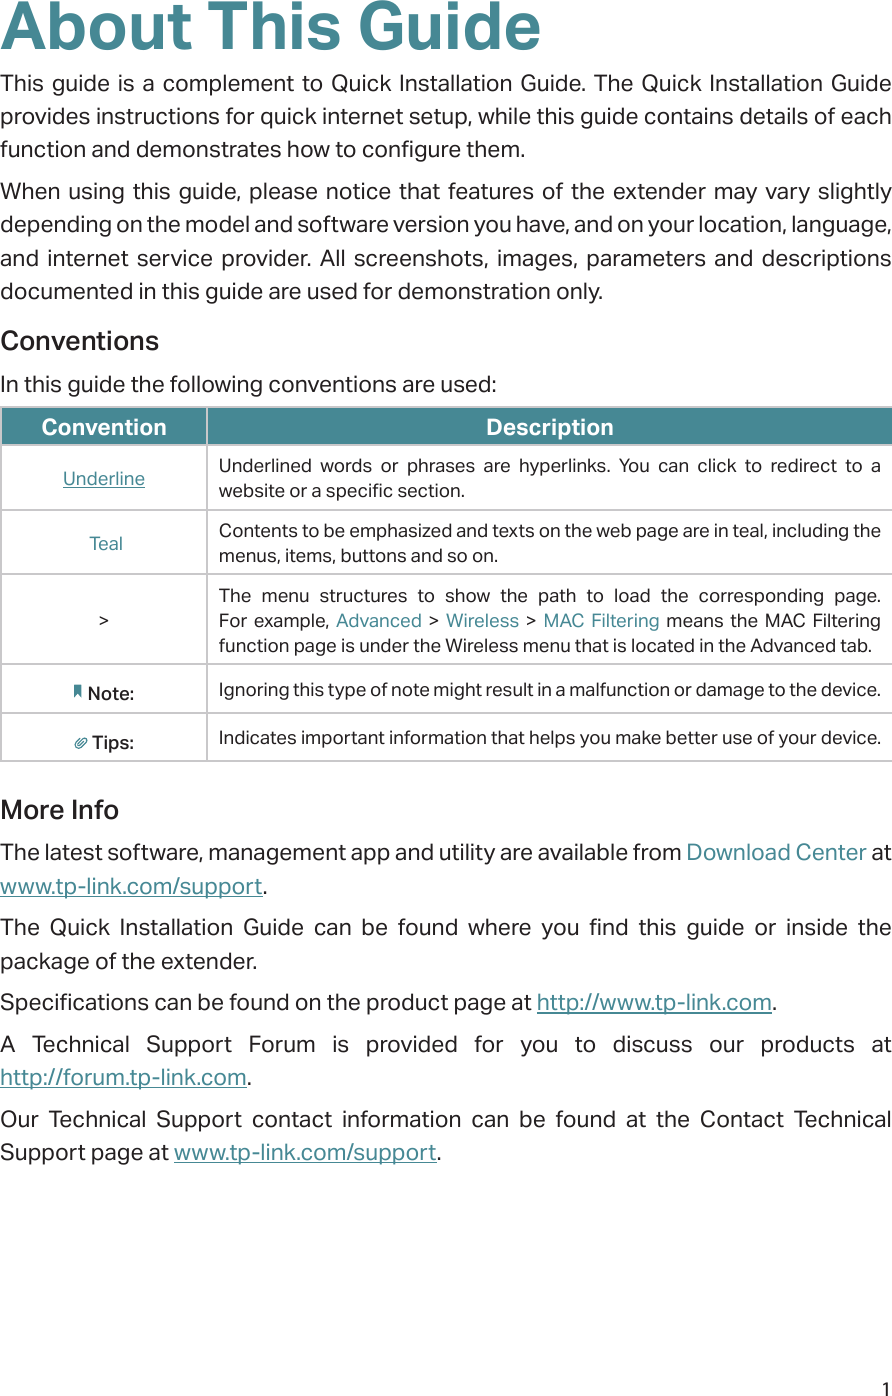 1About This GuideThis guide is a complement to Quick Installation Guide. The Quick Installation Guide provides instructions for quick internet setup, while this guide contains details of each function and demonstrates how to configure them. When using this guide, please notice that features of the extender may vary slightly depending on the model and software version you have, and on your location, language, and internet service provider. All screenshots, images, parameters and descriptions documented in this guide are used for demonstration only.ConventionsIn this guide the following conventions are used:Convention DescriptionUnderline Underlined words or phrases are hyperlinks. You can click to redirect to a website or a specific section. Teal Contents to be emphasized and texts on the web page are in teal, including the menus, items, buttons and so on.&gt;The menu structures to show the path to load the corresponding page. For example, Advanced &gt; Wireless &gt; MAC Filtering means the MAC Filtering function page is under the Wireless menu that is located in the Advanced tab.Note: Ignoring this type of note might result in a malfunction or damage to the device.Tips: Indicates important information that helps you make better use of your device.More InfoThe latest software, management app and utility are available from Download Center at www.tp-link.com/support.The Quick Installation Guide can be found where you find this guide or inside the package of the extender.Specifications can be found on the product page at http://www.tp-link.com.A Technical Support Forum is provided for you to discuss our products at  http://forum.tp-link.com.Our Technical Support contact information can be found at the Contact Technical Support page at www.tp-link.com/support.